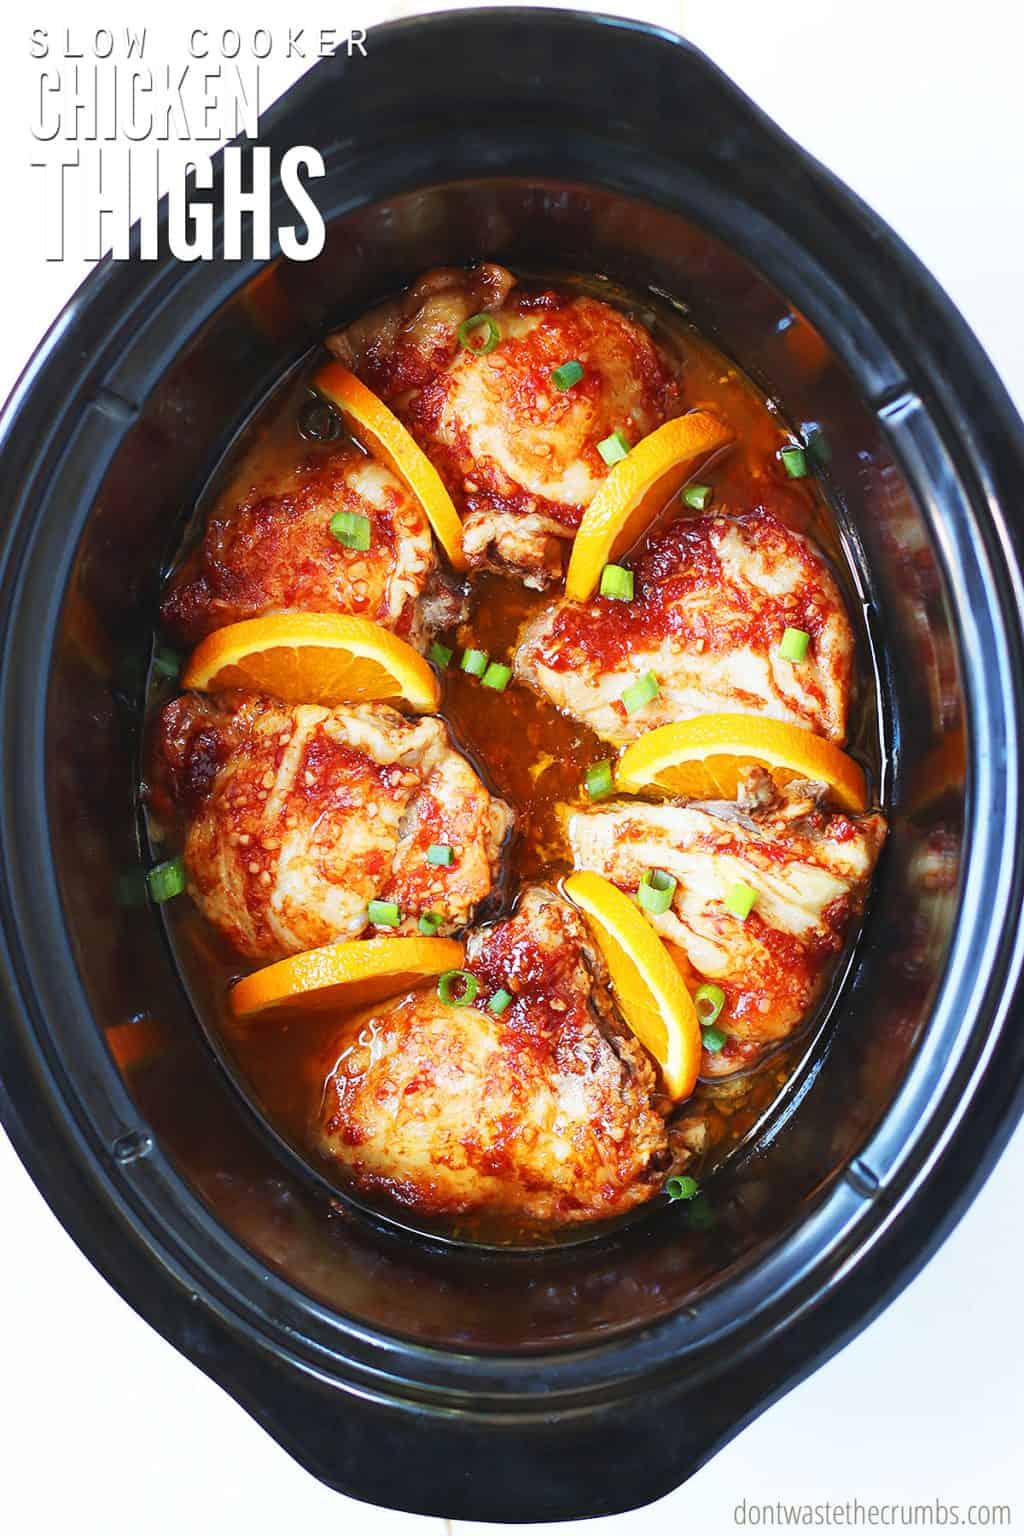 Easy Slow Cooker Chicken Thighs Recipe - Don't Waste the Crumbs